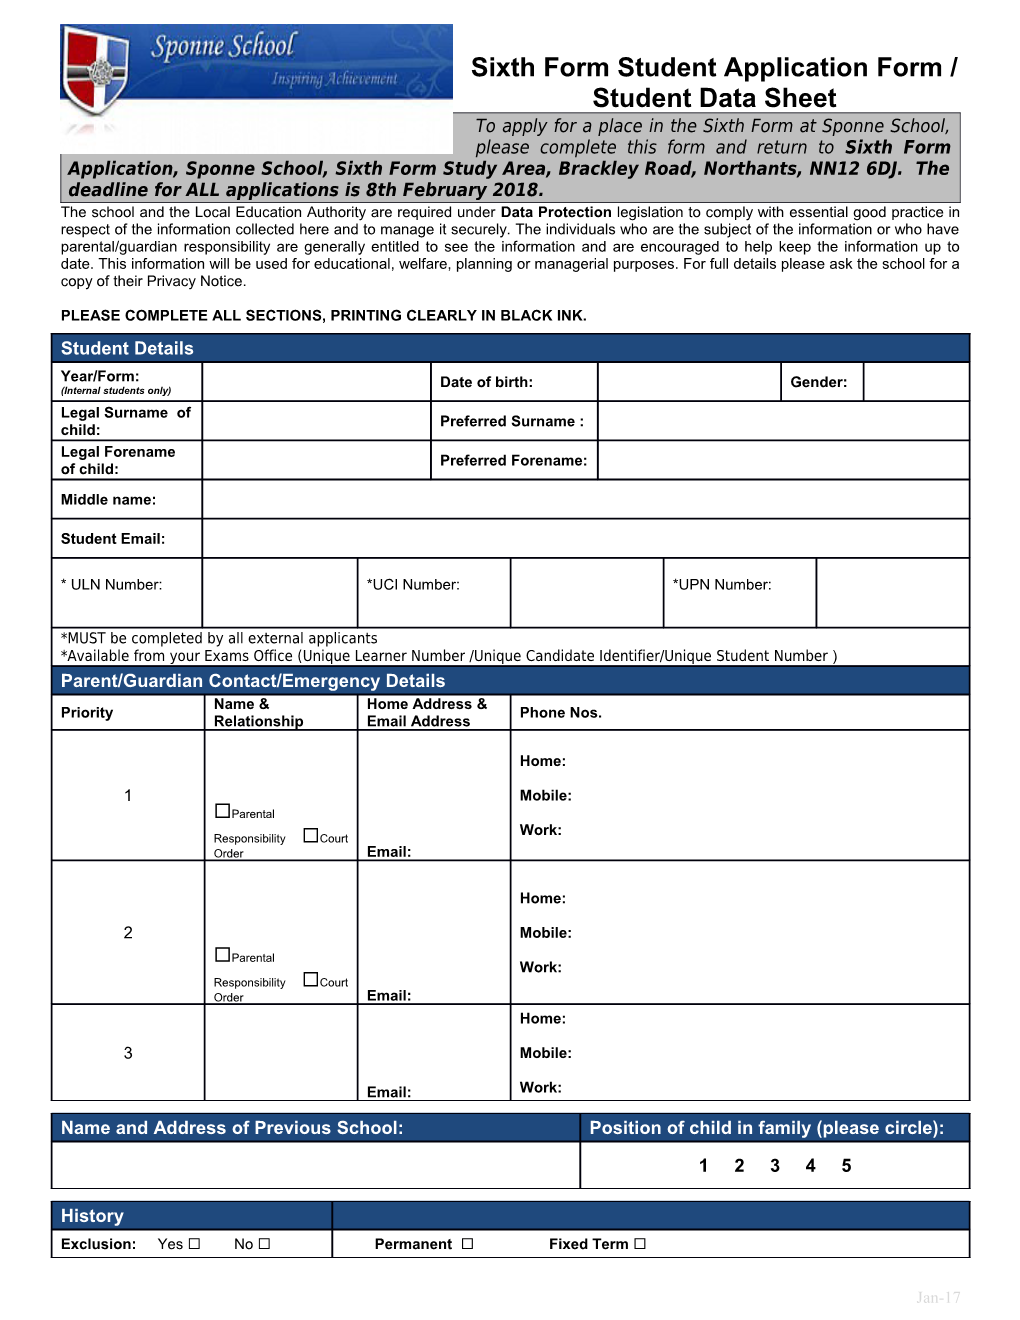 Sixth Form Student Application Form / Student Data Sheet